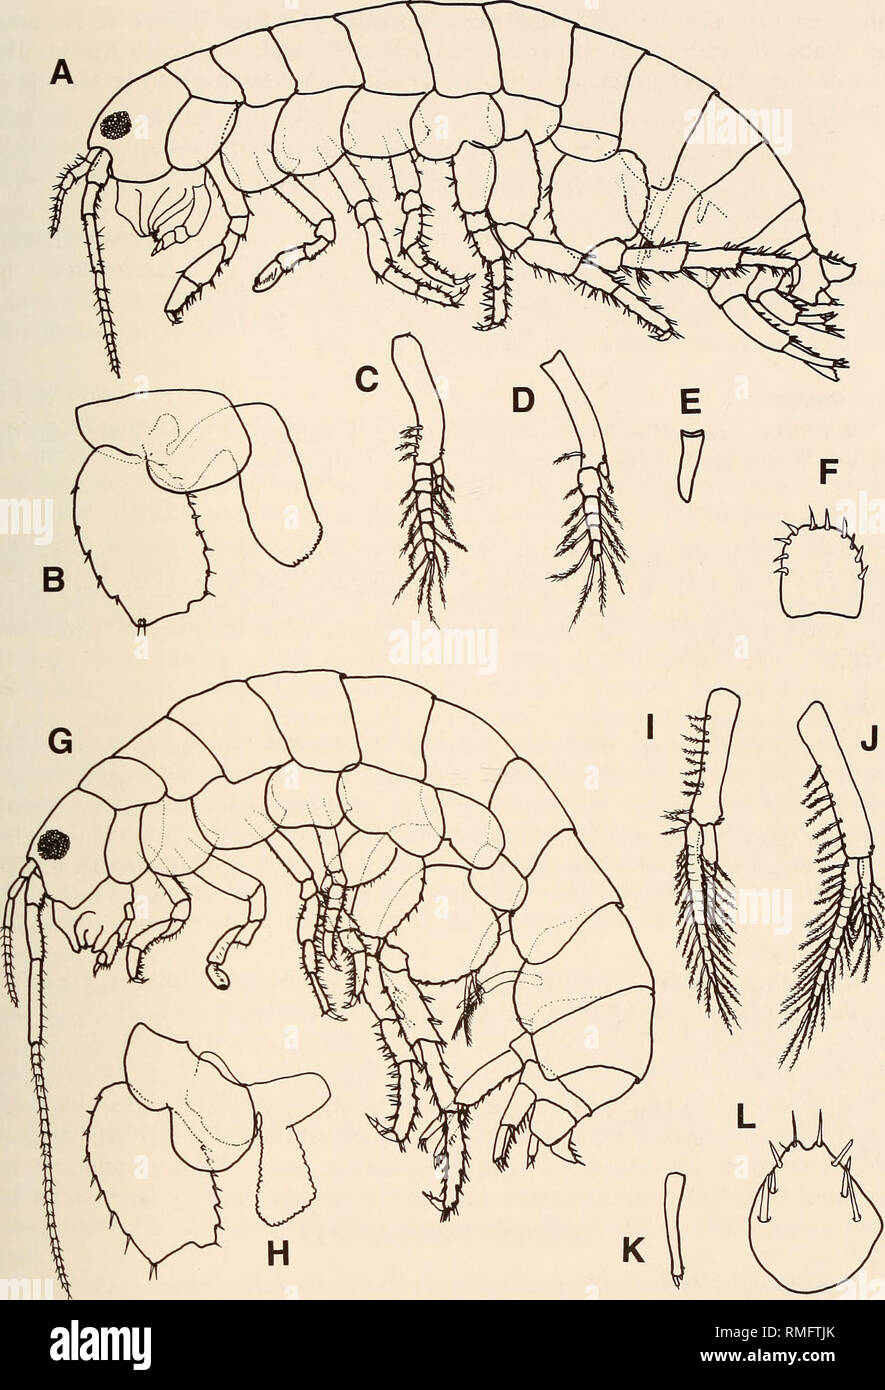 . Annals of the South African Museum = Annale van die Suid-Afrikaanse Museum. Natural history. TERRESTRIAL AMPHIPODS OF SOUTH AFRICA 349. Fig. 1. A-F. Talitroides alluaudi (Chevreux, 1896), male, 5 mm, UCT gardens. A. Lateral aspect. B. Base of pereopod 6 showing gill. C-E. Pleopods 1, 2, 3. F. Telson. G-L. Talitroides topitotum (Burt, 1934), male, 11 mm, Pinelands, Cape Town. G. Lateral view. H. Base of pereopod 6 showing gill. I-K. Pleopods 1, 2, 3. L. Telson.. Please note that these images are extracted from scanned page images that may have been digitally enhanced for readability - colorat Stock Photo